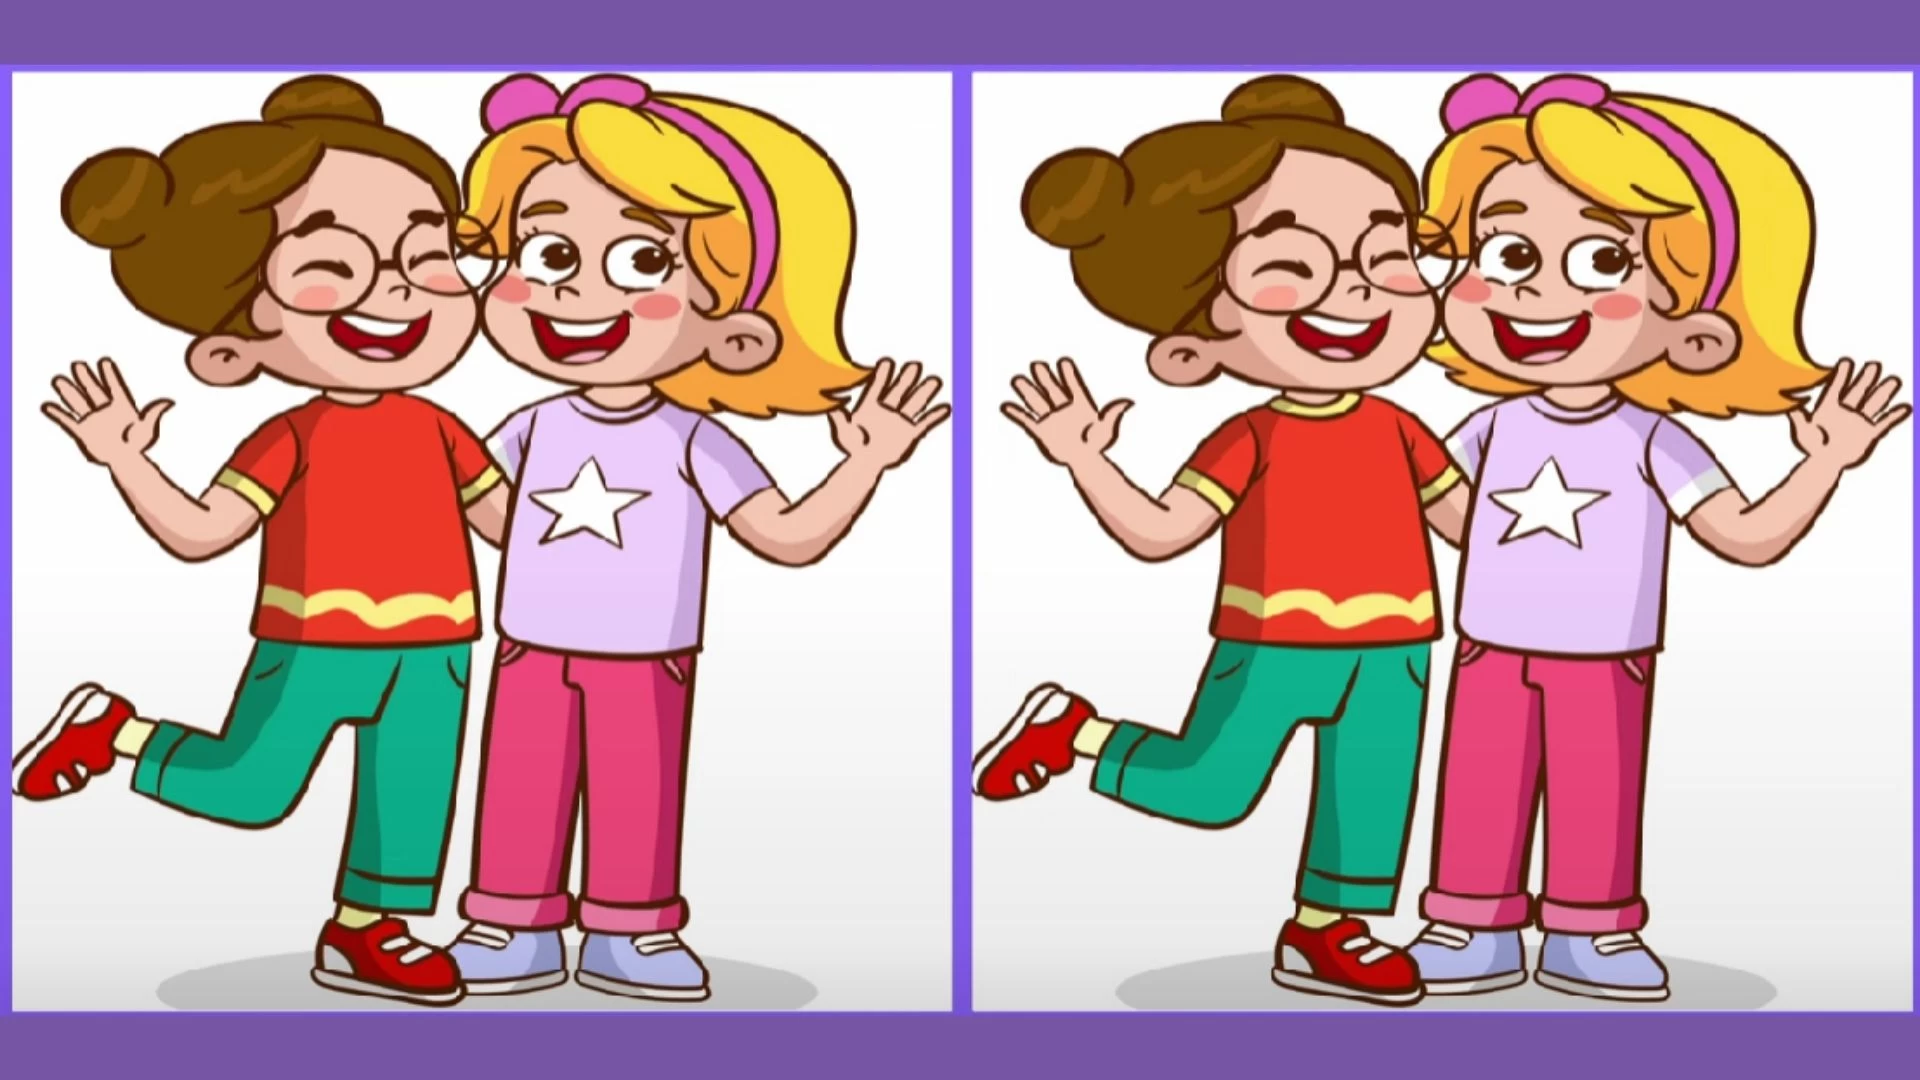 Only 1% can find the 3 differences in these two Friends' pictures in less than 15 Seconds